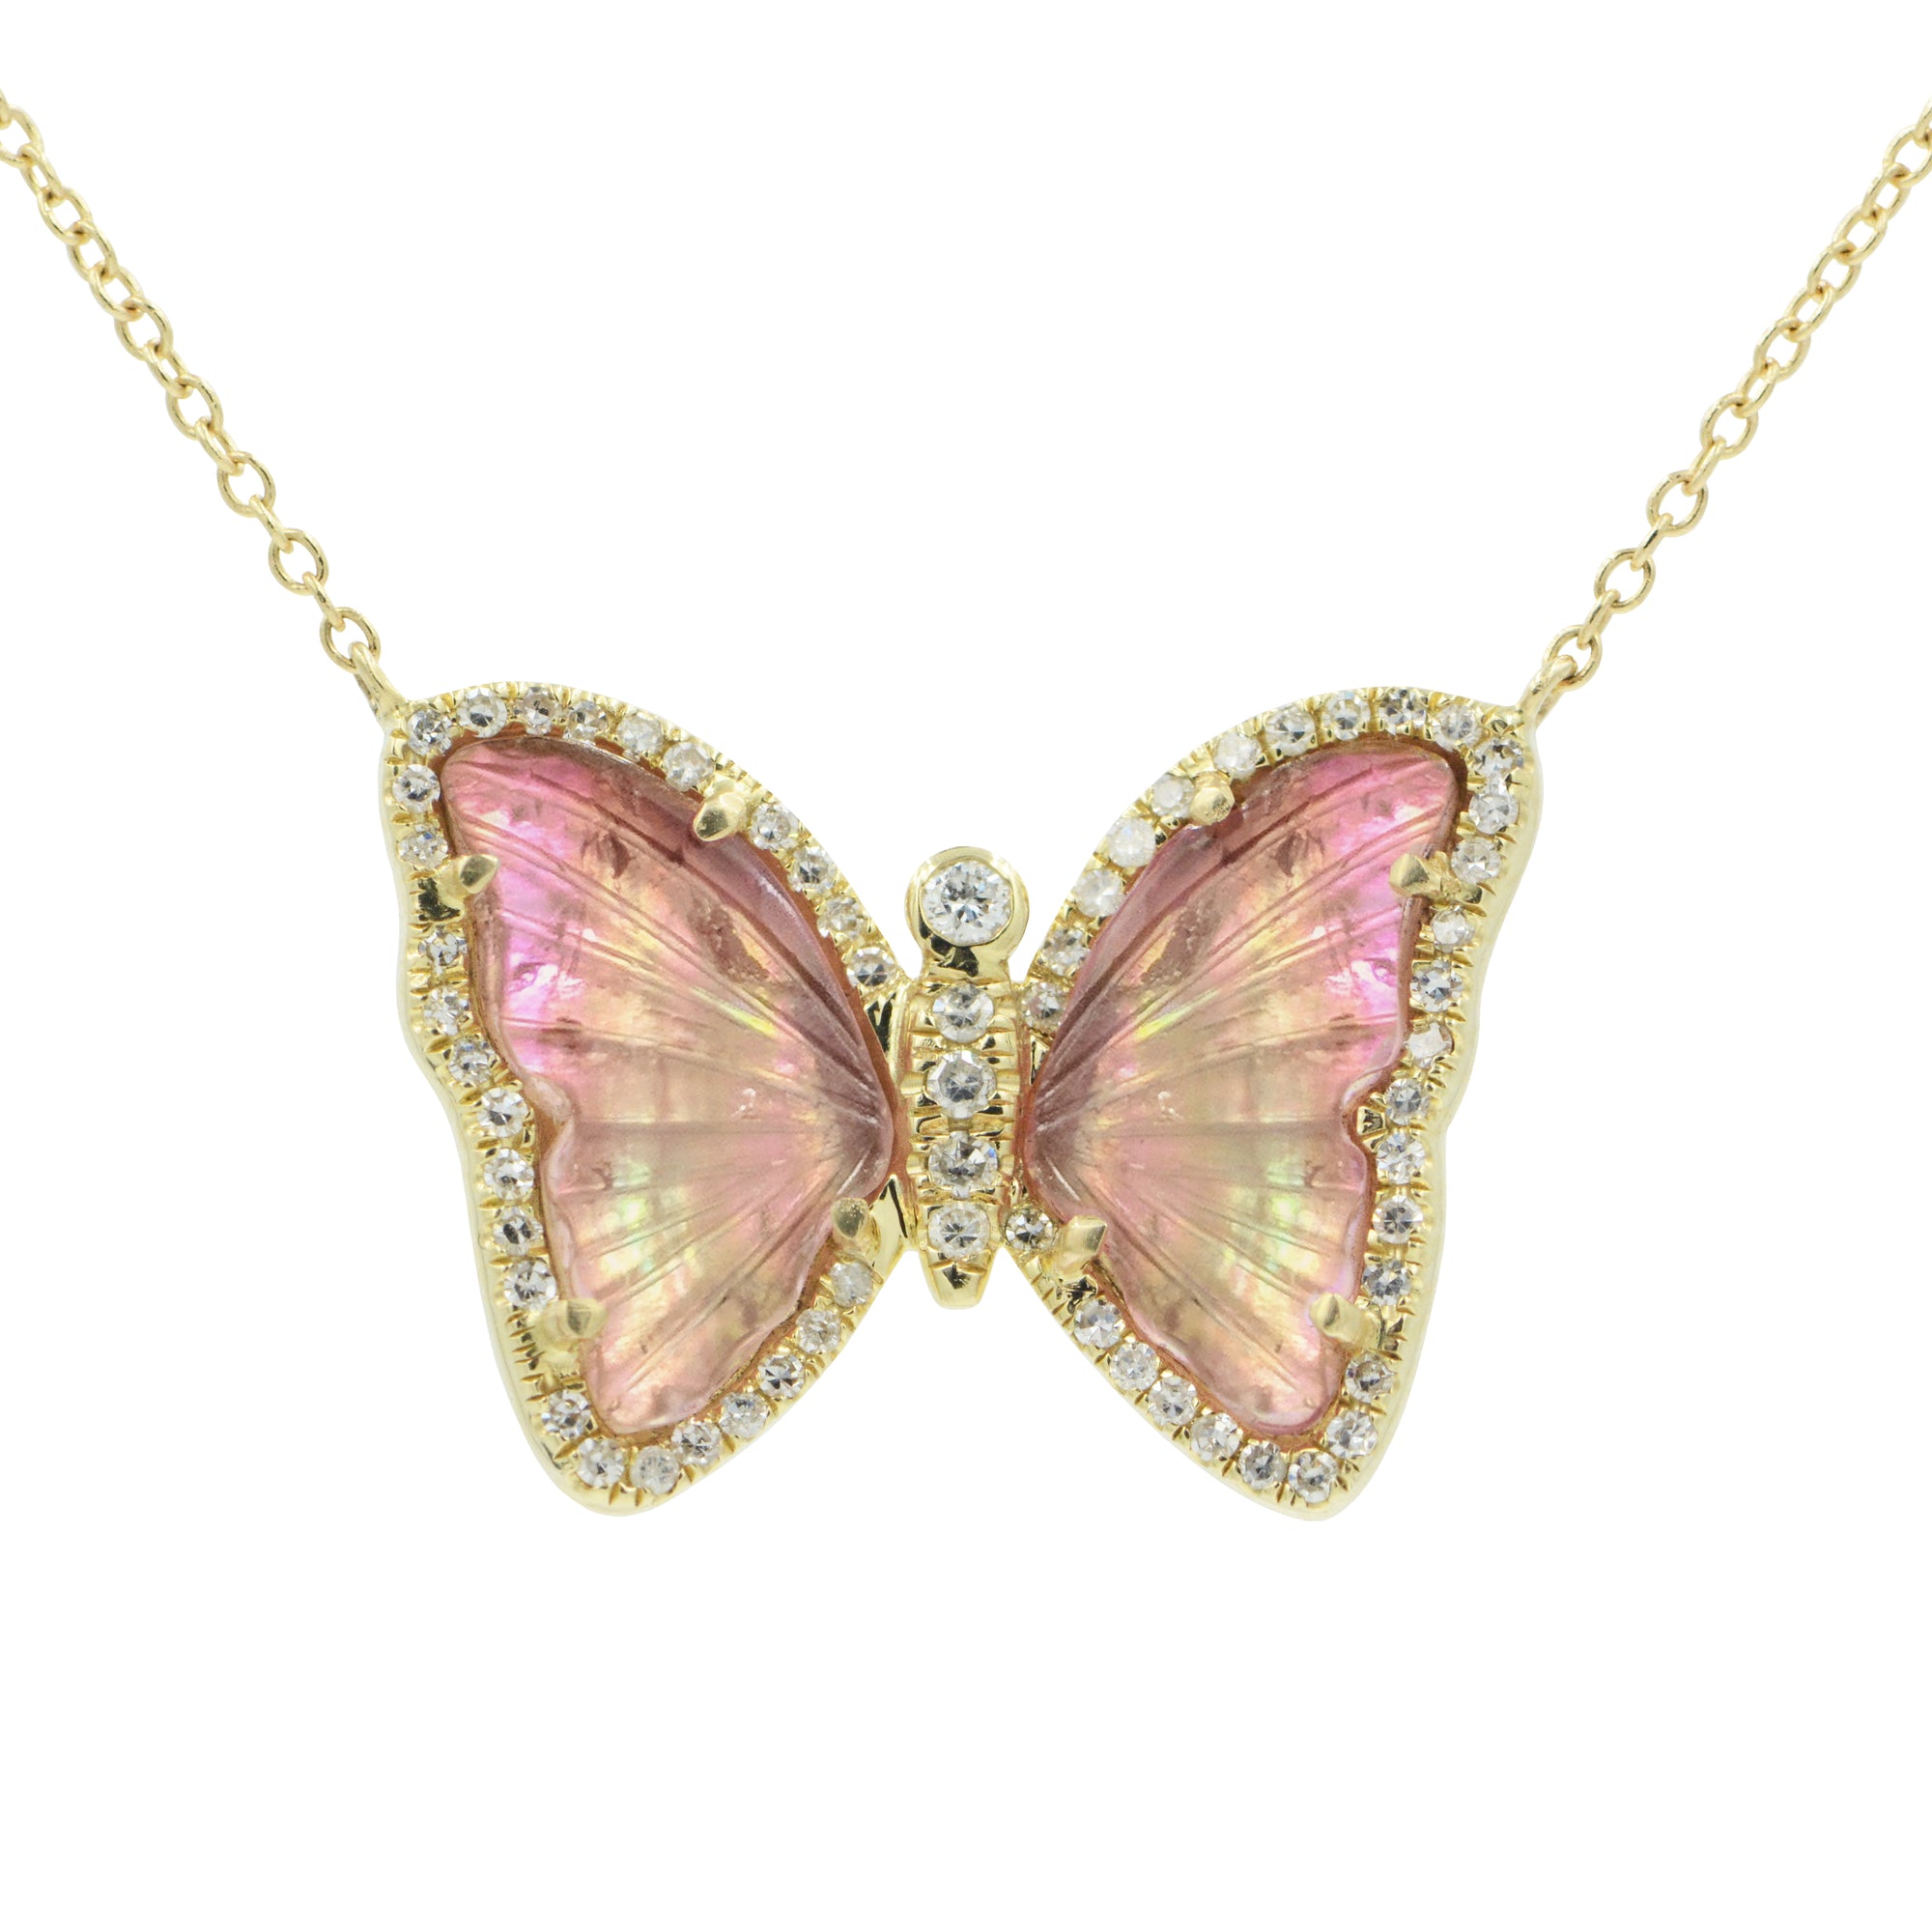 Butterfly Necklace With Pink Tourmaline and Pearl